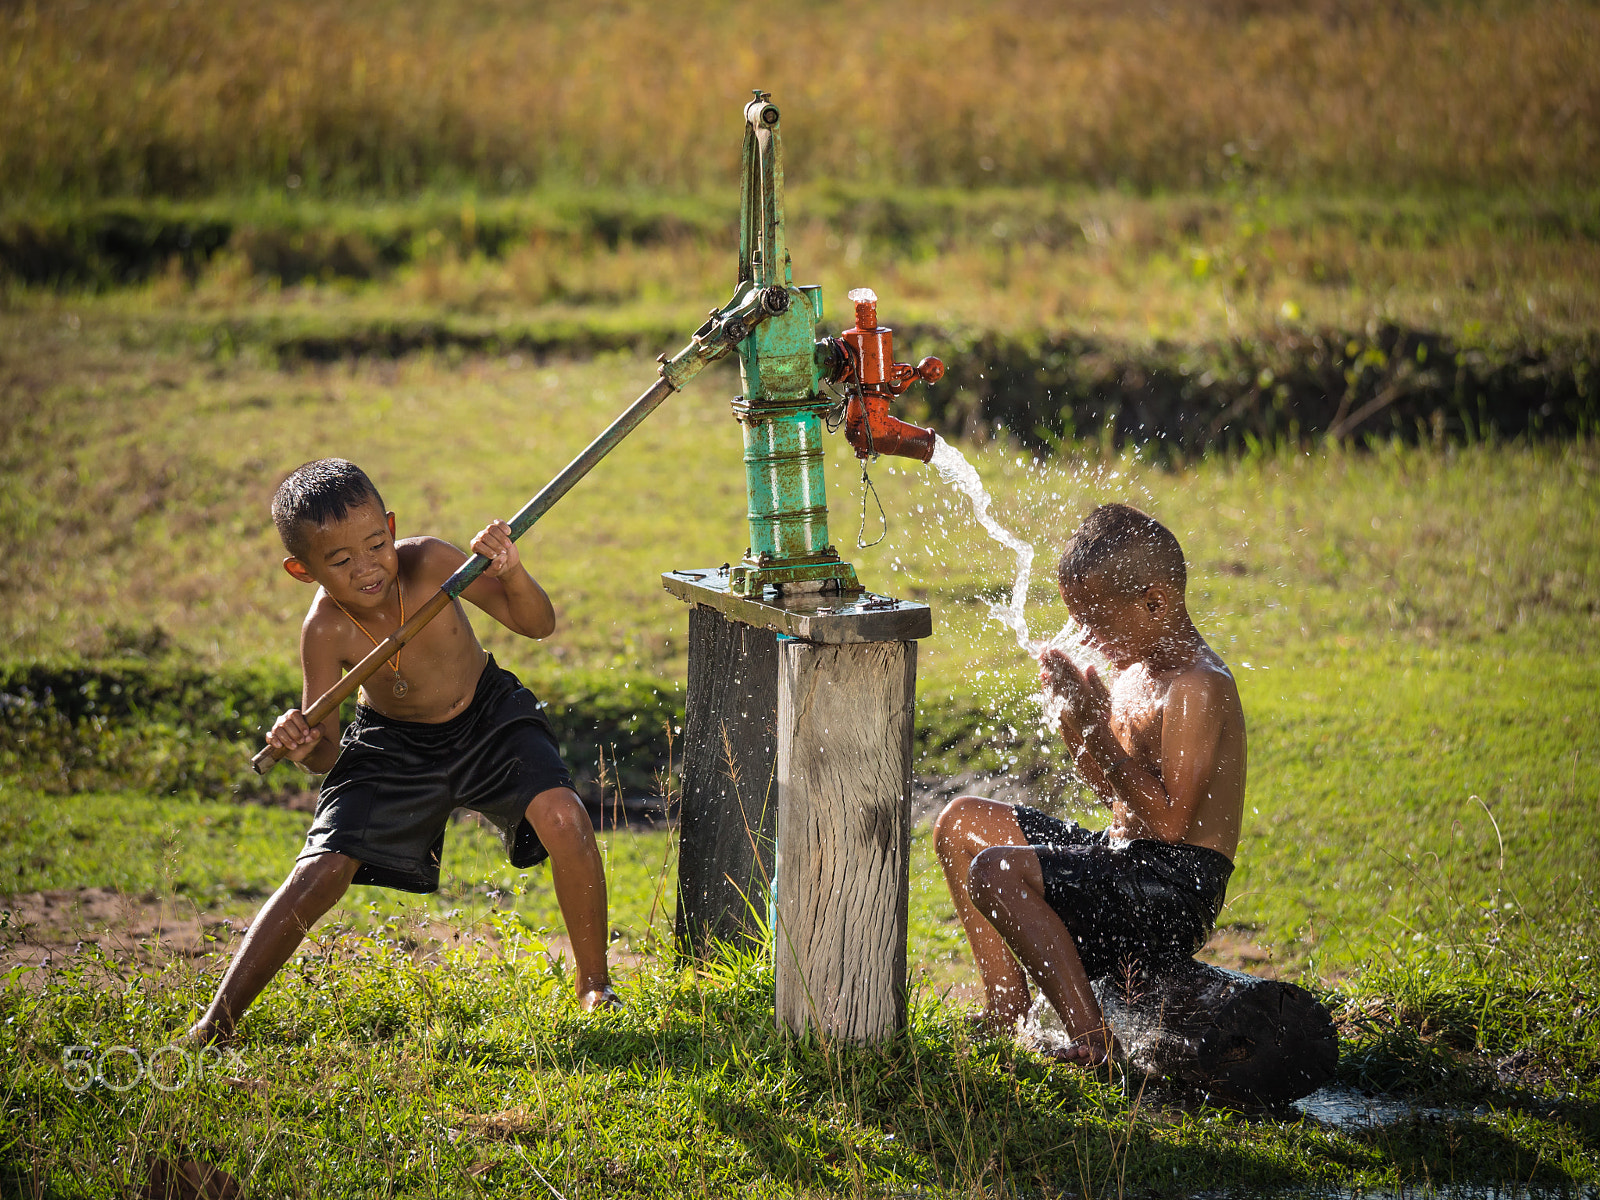 Panasonic Lumix DMC-GH4 sample photo. Two young boy rocking groundwater bathe in the hot days, country photography